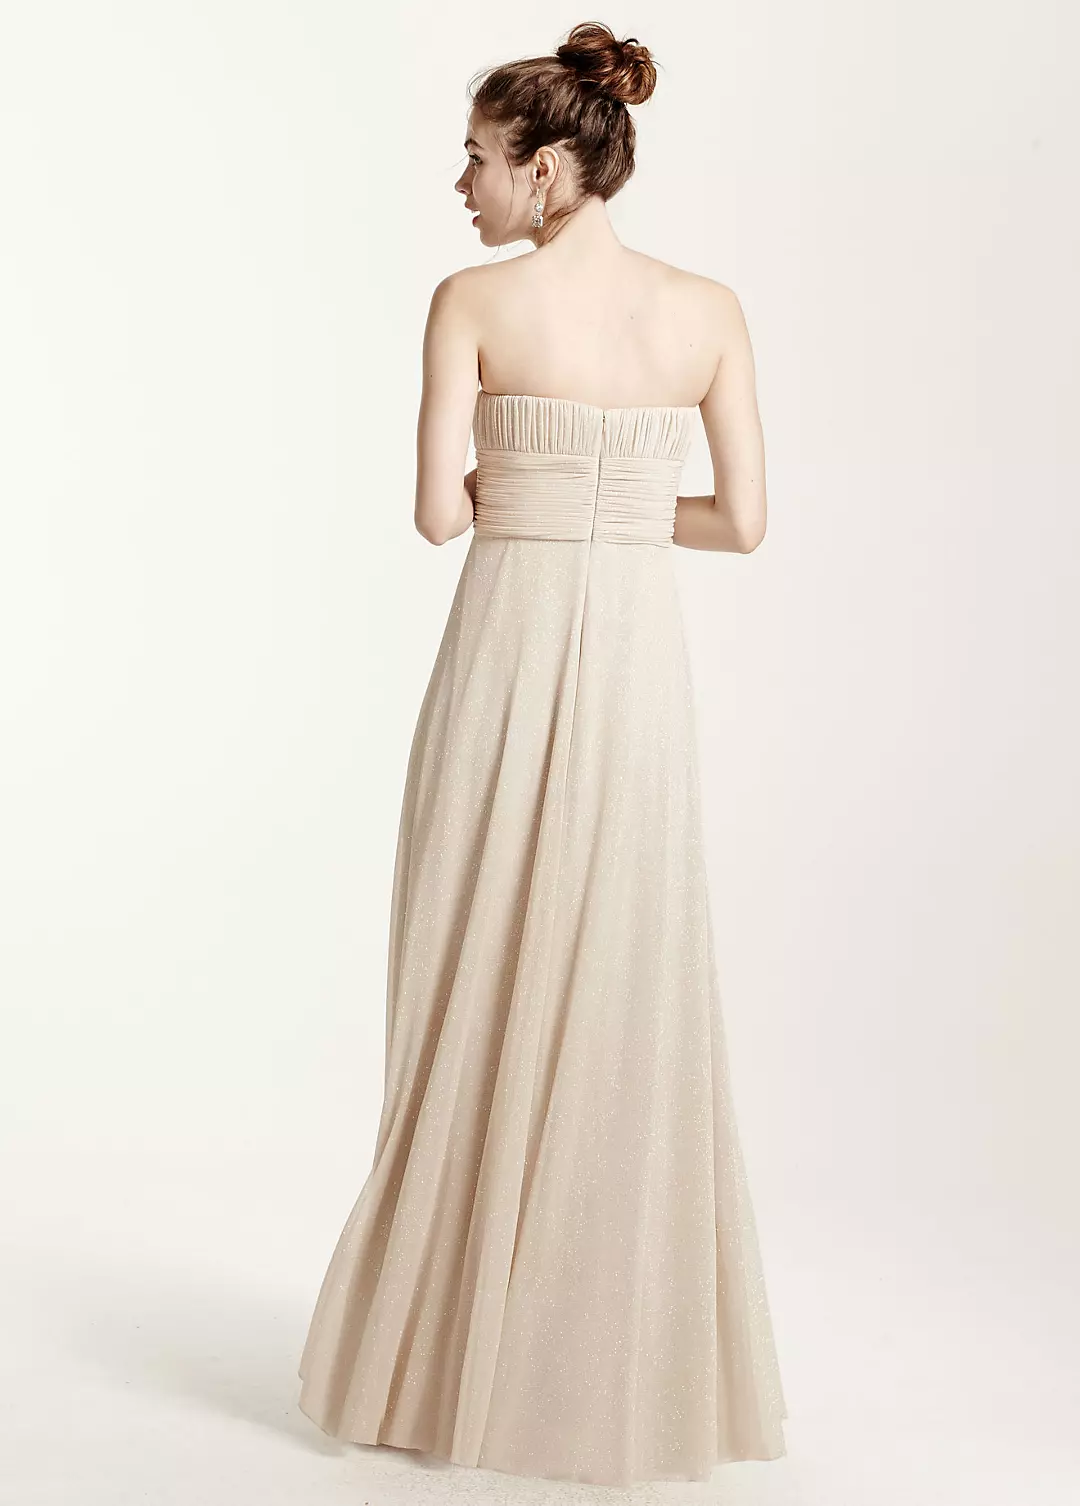 Strapless Glitter Jersey Dress with Shirred Bodice Image 2